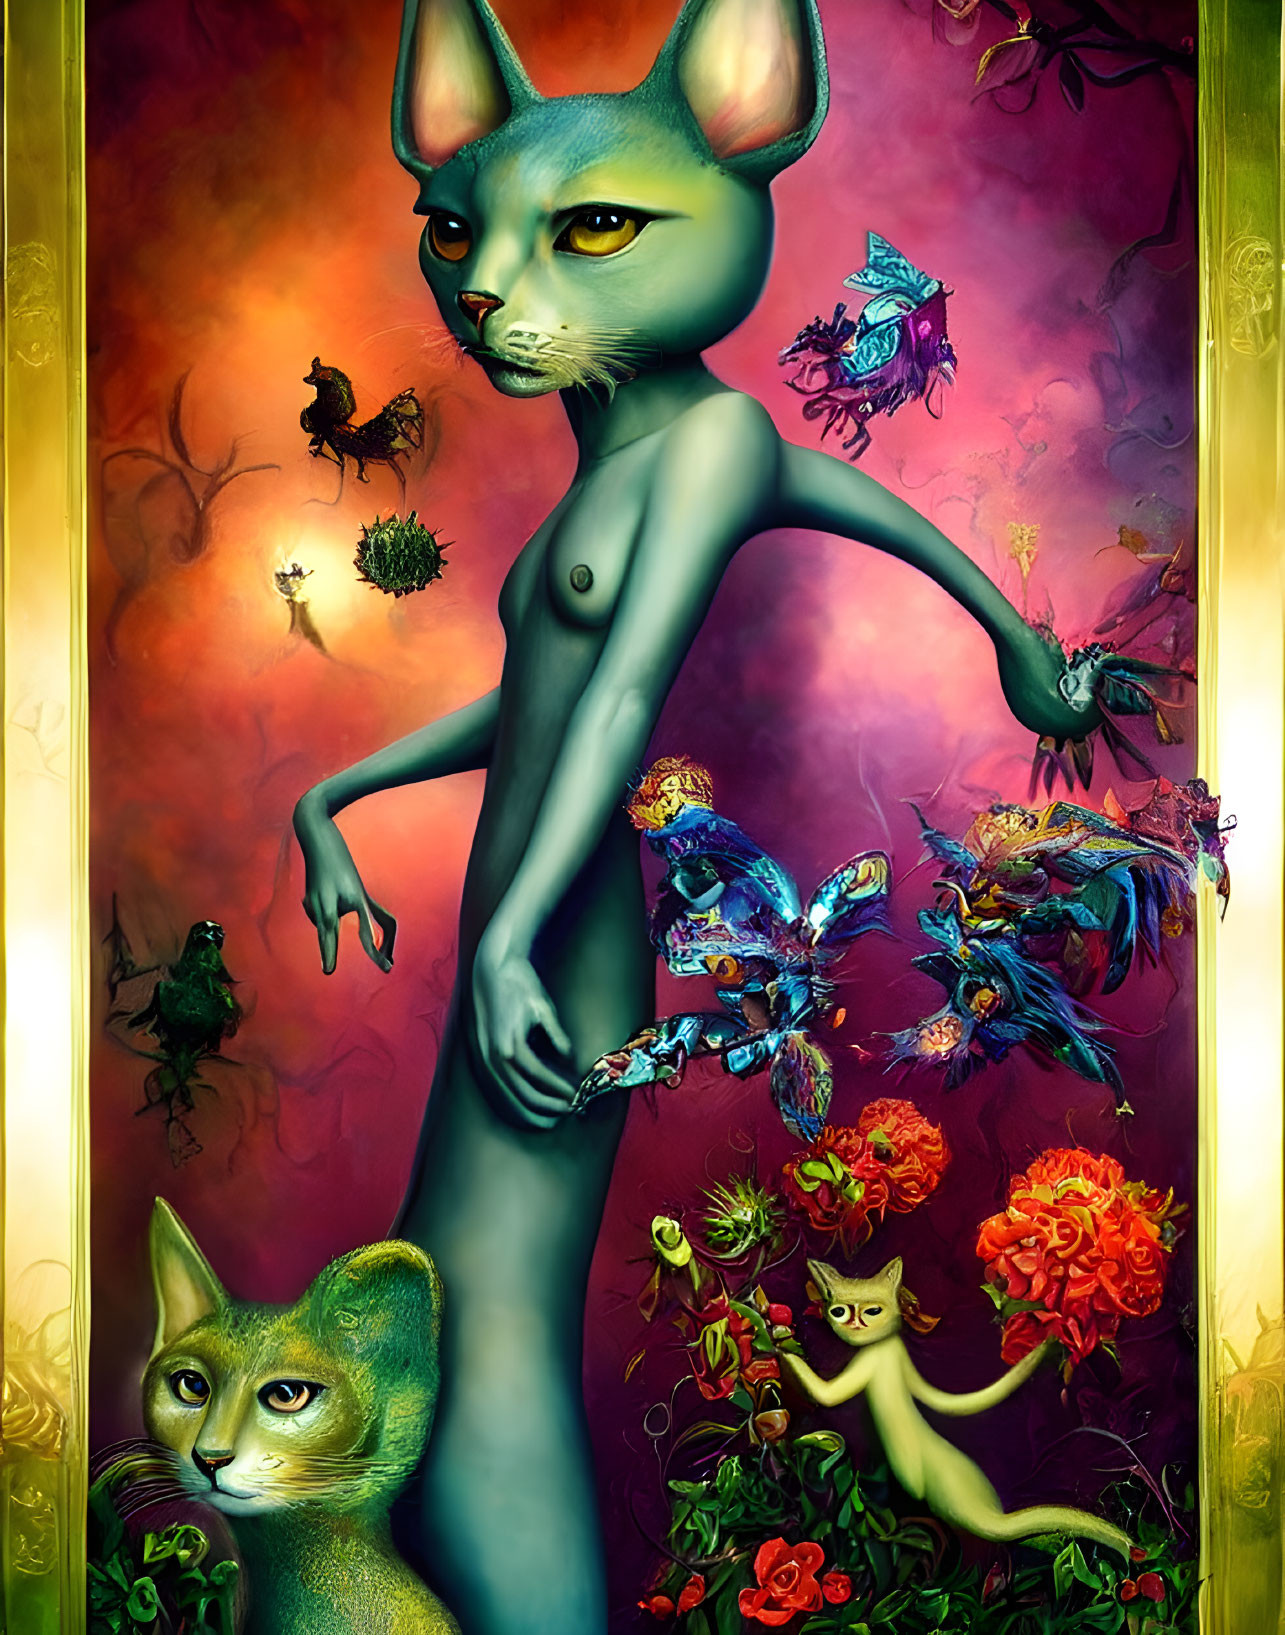 Surreal anthropomorphic cats in colorful floral fantasy scene